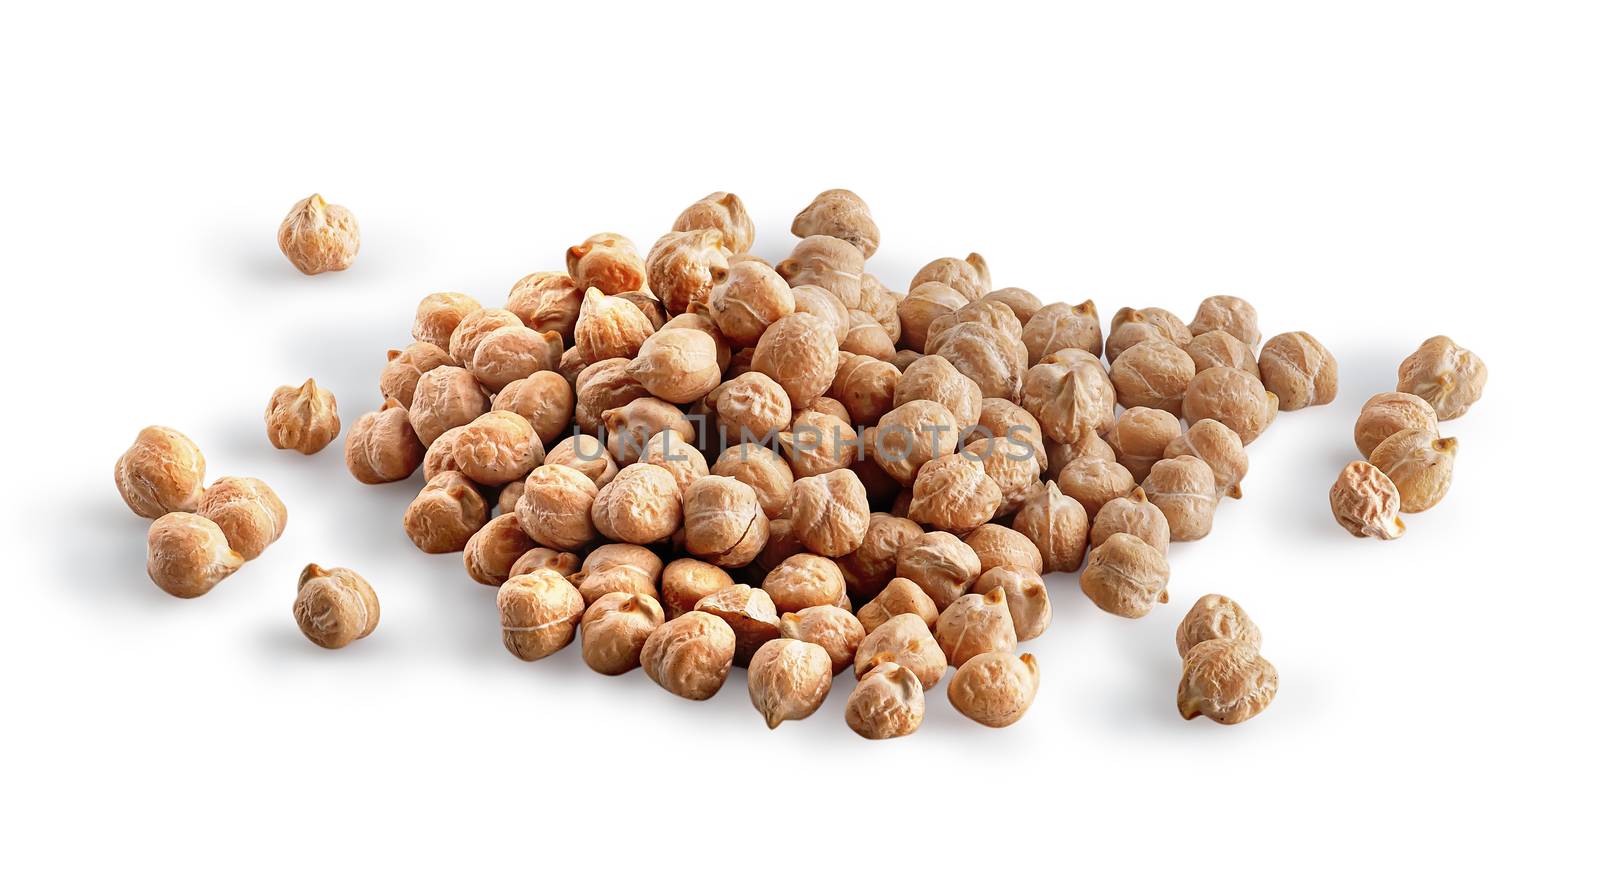 Heap of chickpeas on white background by Cipariss